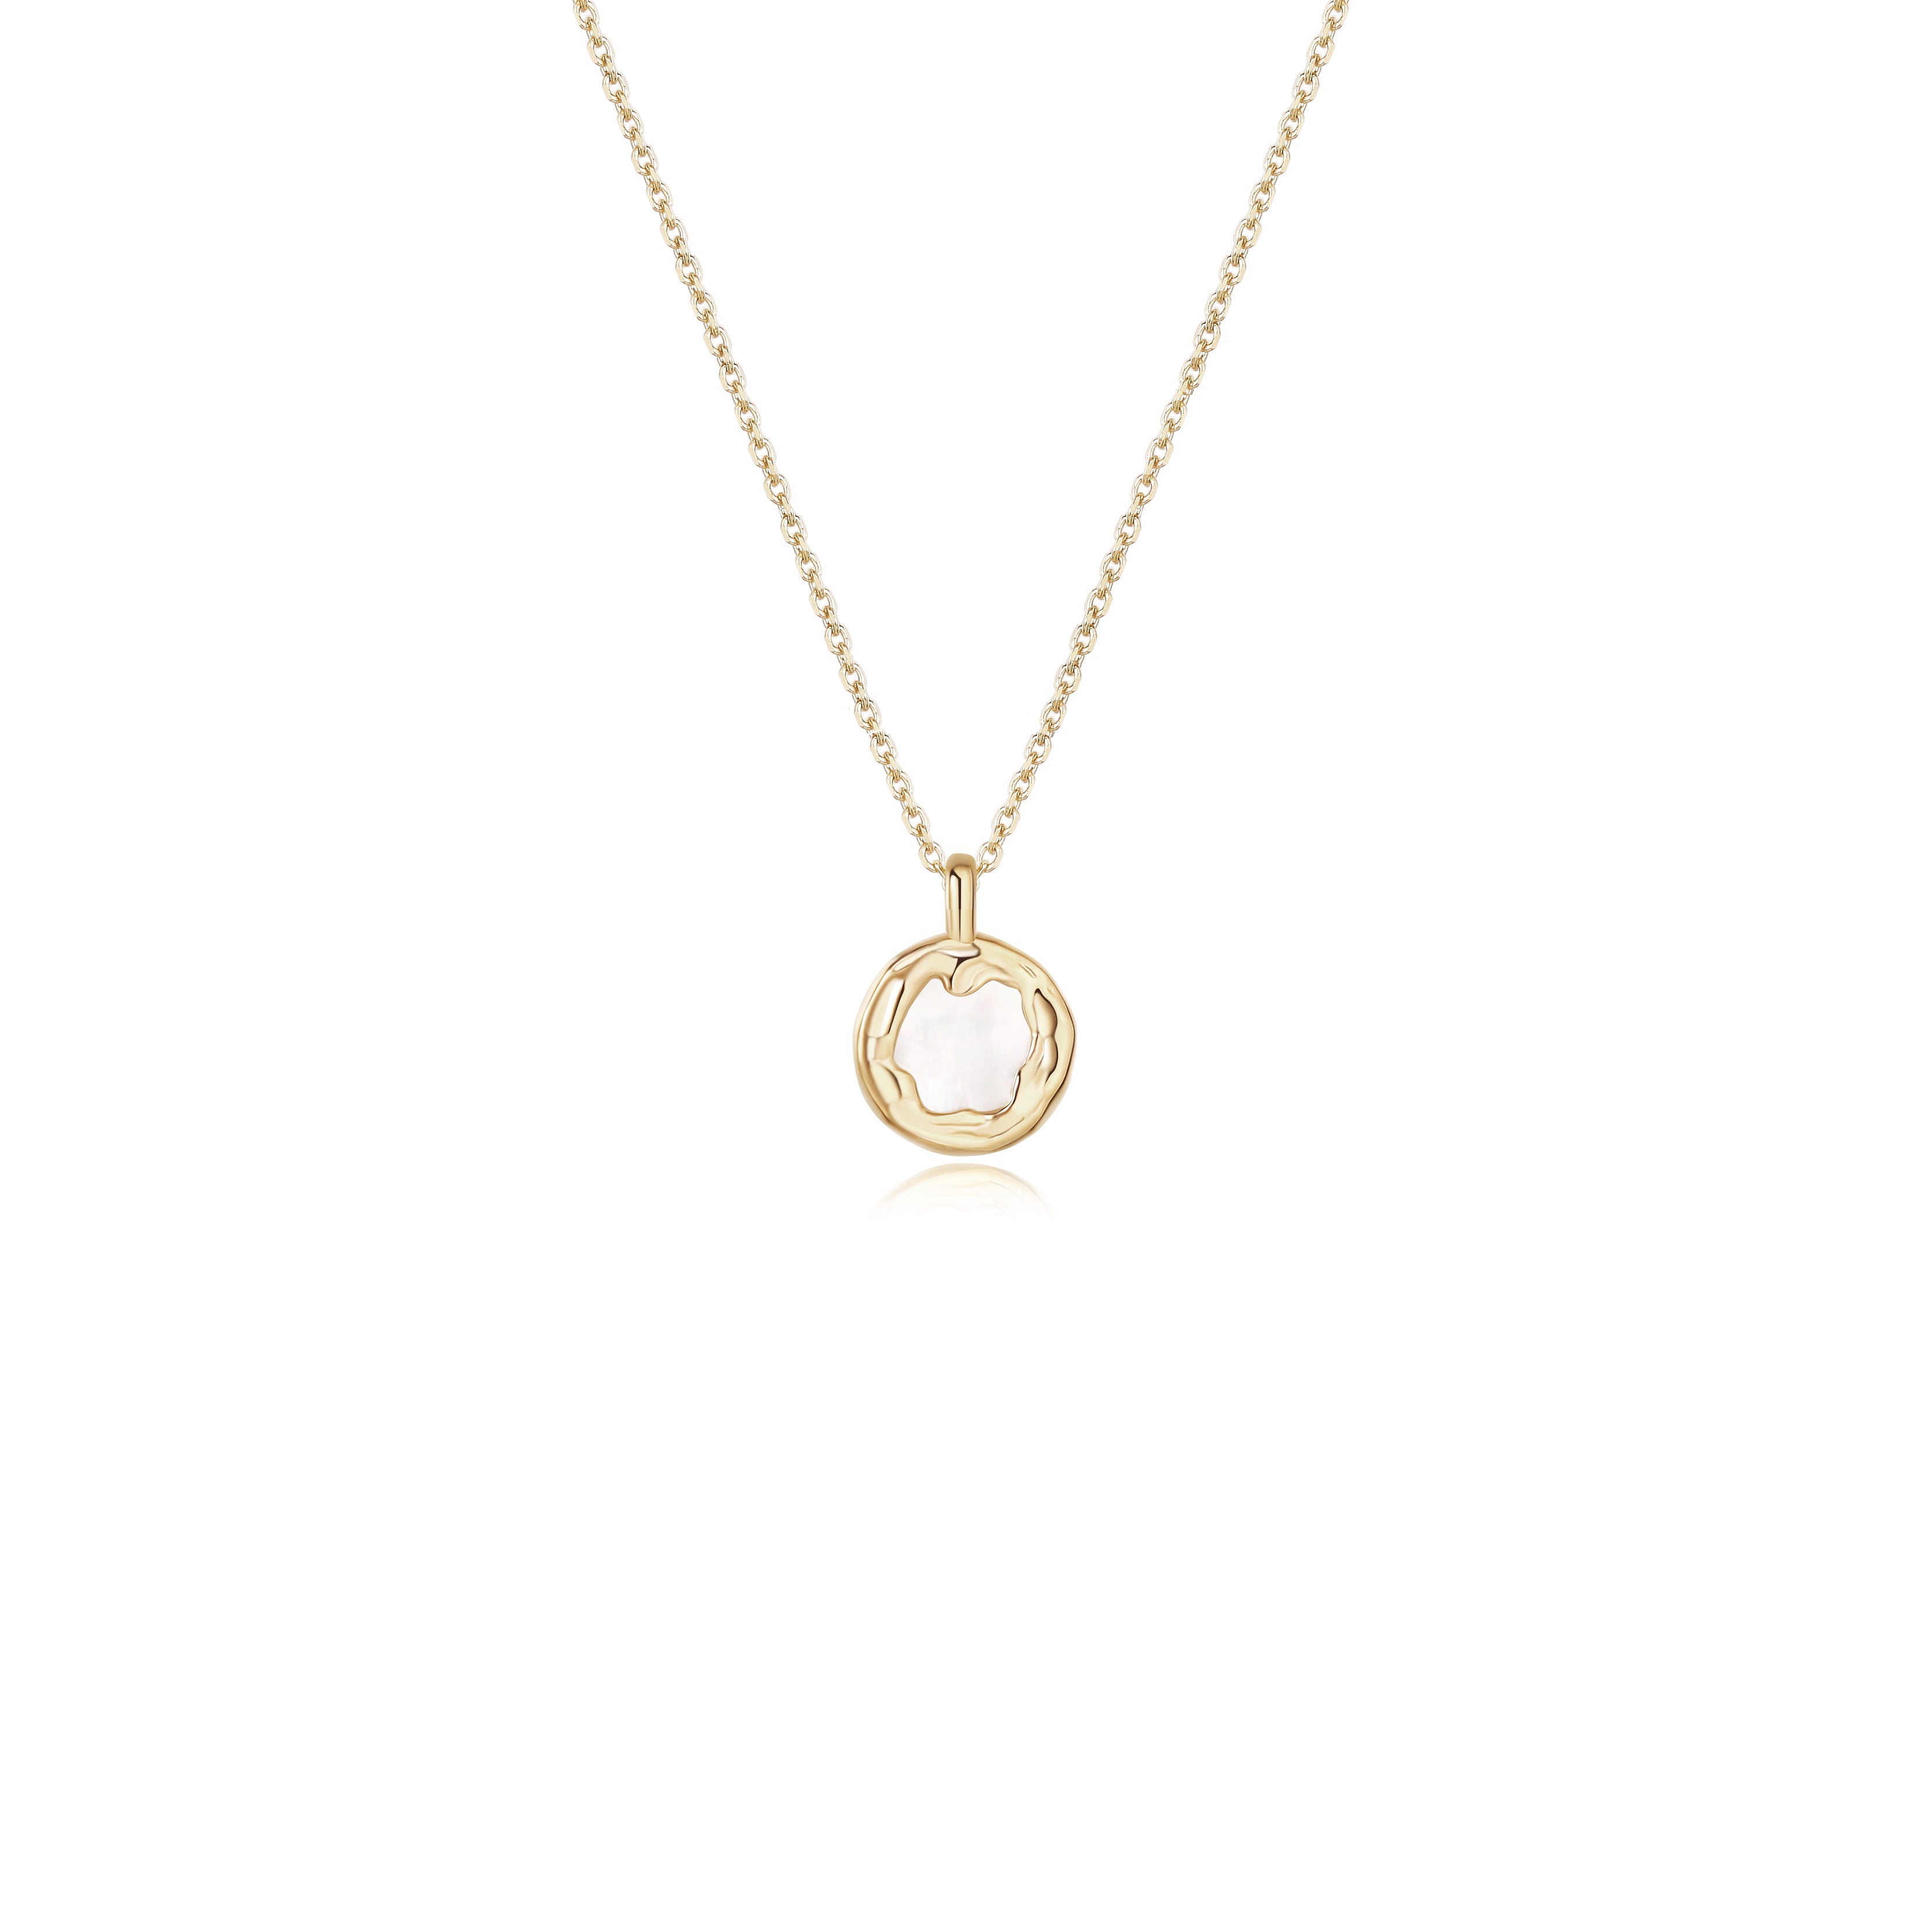 Atania Necklace - Solid Gold